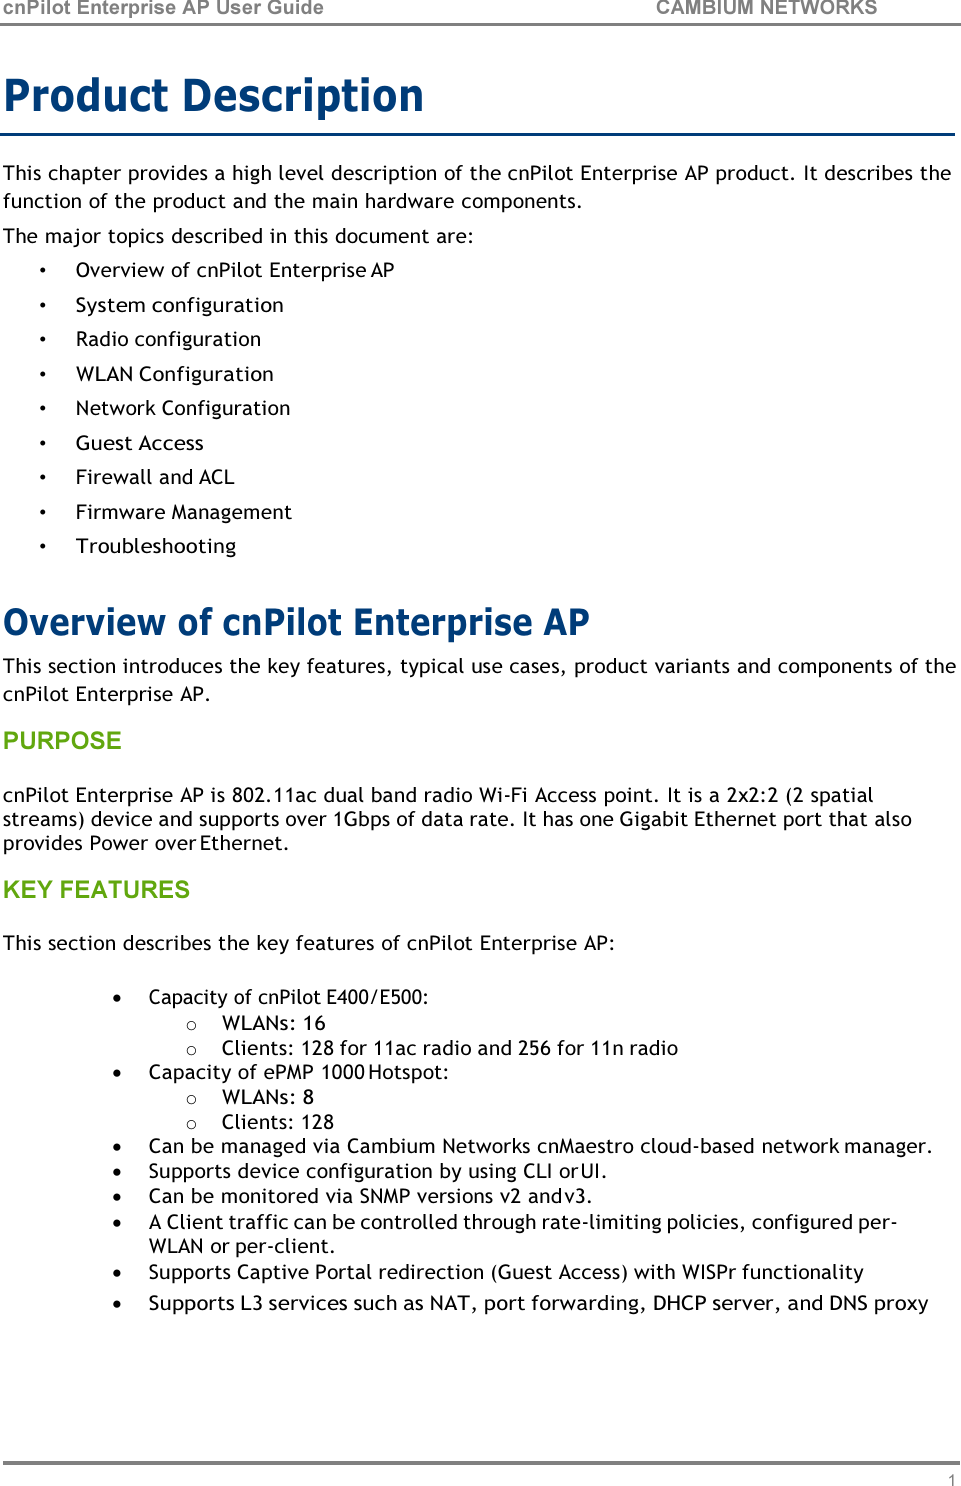 14 cnPilot Enterprise AP User Guide CAMBIUM NETWORKS    Product Description  This chapter provides a high level description of the cnPilot Enterprise AP product. It describes the function of the product and the main hardware components. The major topics described in this document are: • Overview of cnPilot Enterprise AP • System configuration • Radio configuration • WLAN Configuration • Network Configuration • Guest Access • Firewall and ACL • Firmware Management • Troubleshooting  Overview of cnPilot Enterprise AP This section introduces the key features, typical use cases, product variants and components of the cnPilot Enterprise AP. PURPOSE  cnPilot Enterprise AP is 802.11ac dual band radio Wi-Fi Access point. It is a 2x2:2 (2 spatial streams) device and supports over 1Gbps of data rate. It has one Gigabit Ethernet port that also provides Power over Ethernet. KEY FEATURES  This section describes the key features of cnPilot Enterprise AP:  • Capacity of cnPilot E400/E500: o WLANs: 16 o Clients: 128 for 11ac radio and 256 for 11n radio • Capacity of ePMP 1000 Hotspot: o WLANs: 8 o Clients: 128 • Can be managed via Cambium Networks cnMaestro cloud-based network manager. • Supports device configuration by using CLI or UI. • Can be monitored via SNMP versions v2 and v3. • A Client traffic can be controlled through rate-limiting policies, configured per- WLAN or per-client. • Supports Captive Portal redirection (Guest Access) with WISPr functionality • Supports L3 services such as NAT, port forwarding, DHCP server, and DNS proxy 